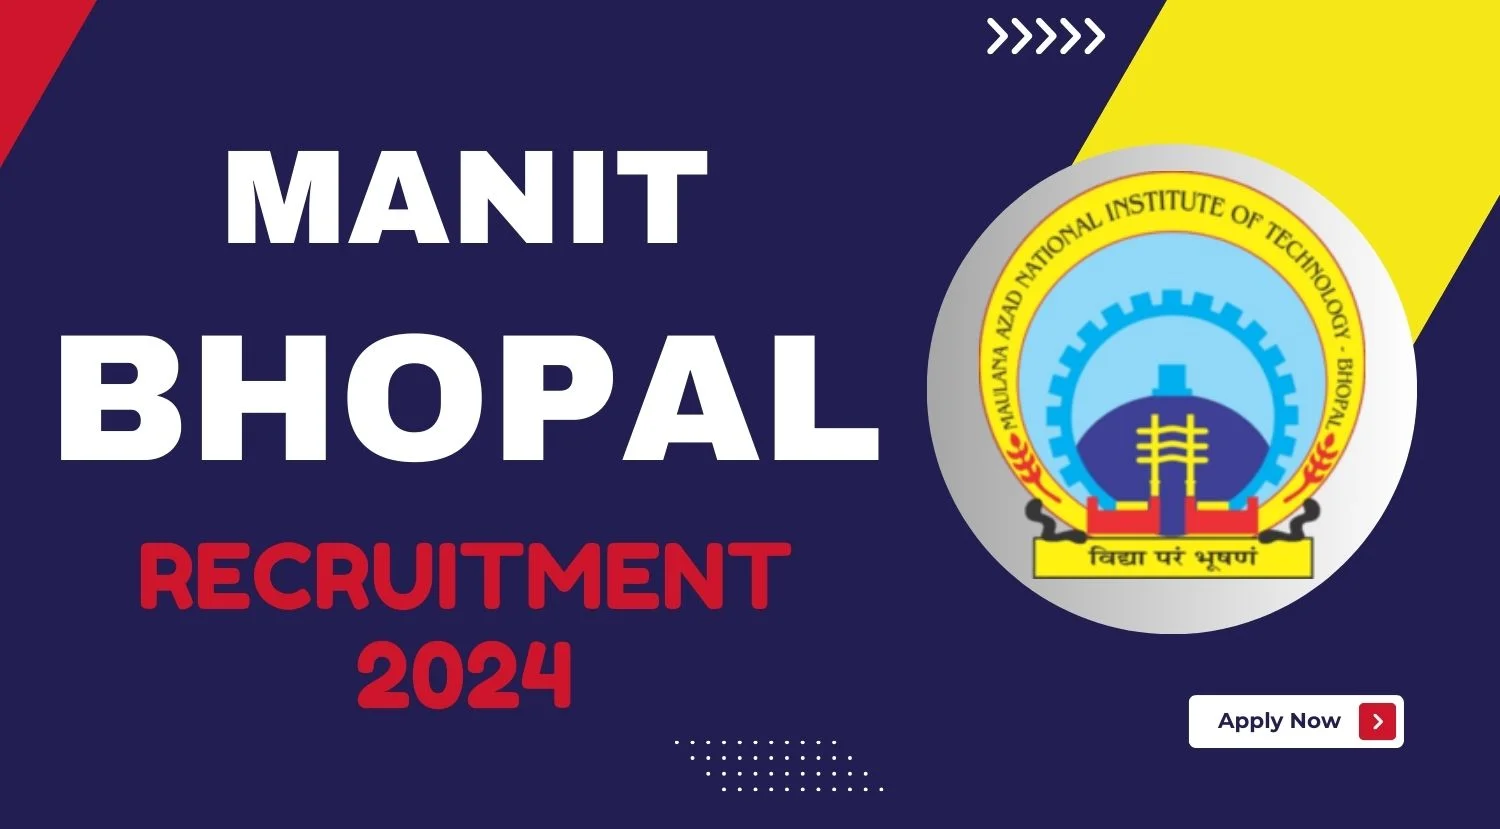 MANIT Bhopal Research Assistant Recruitment 2024